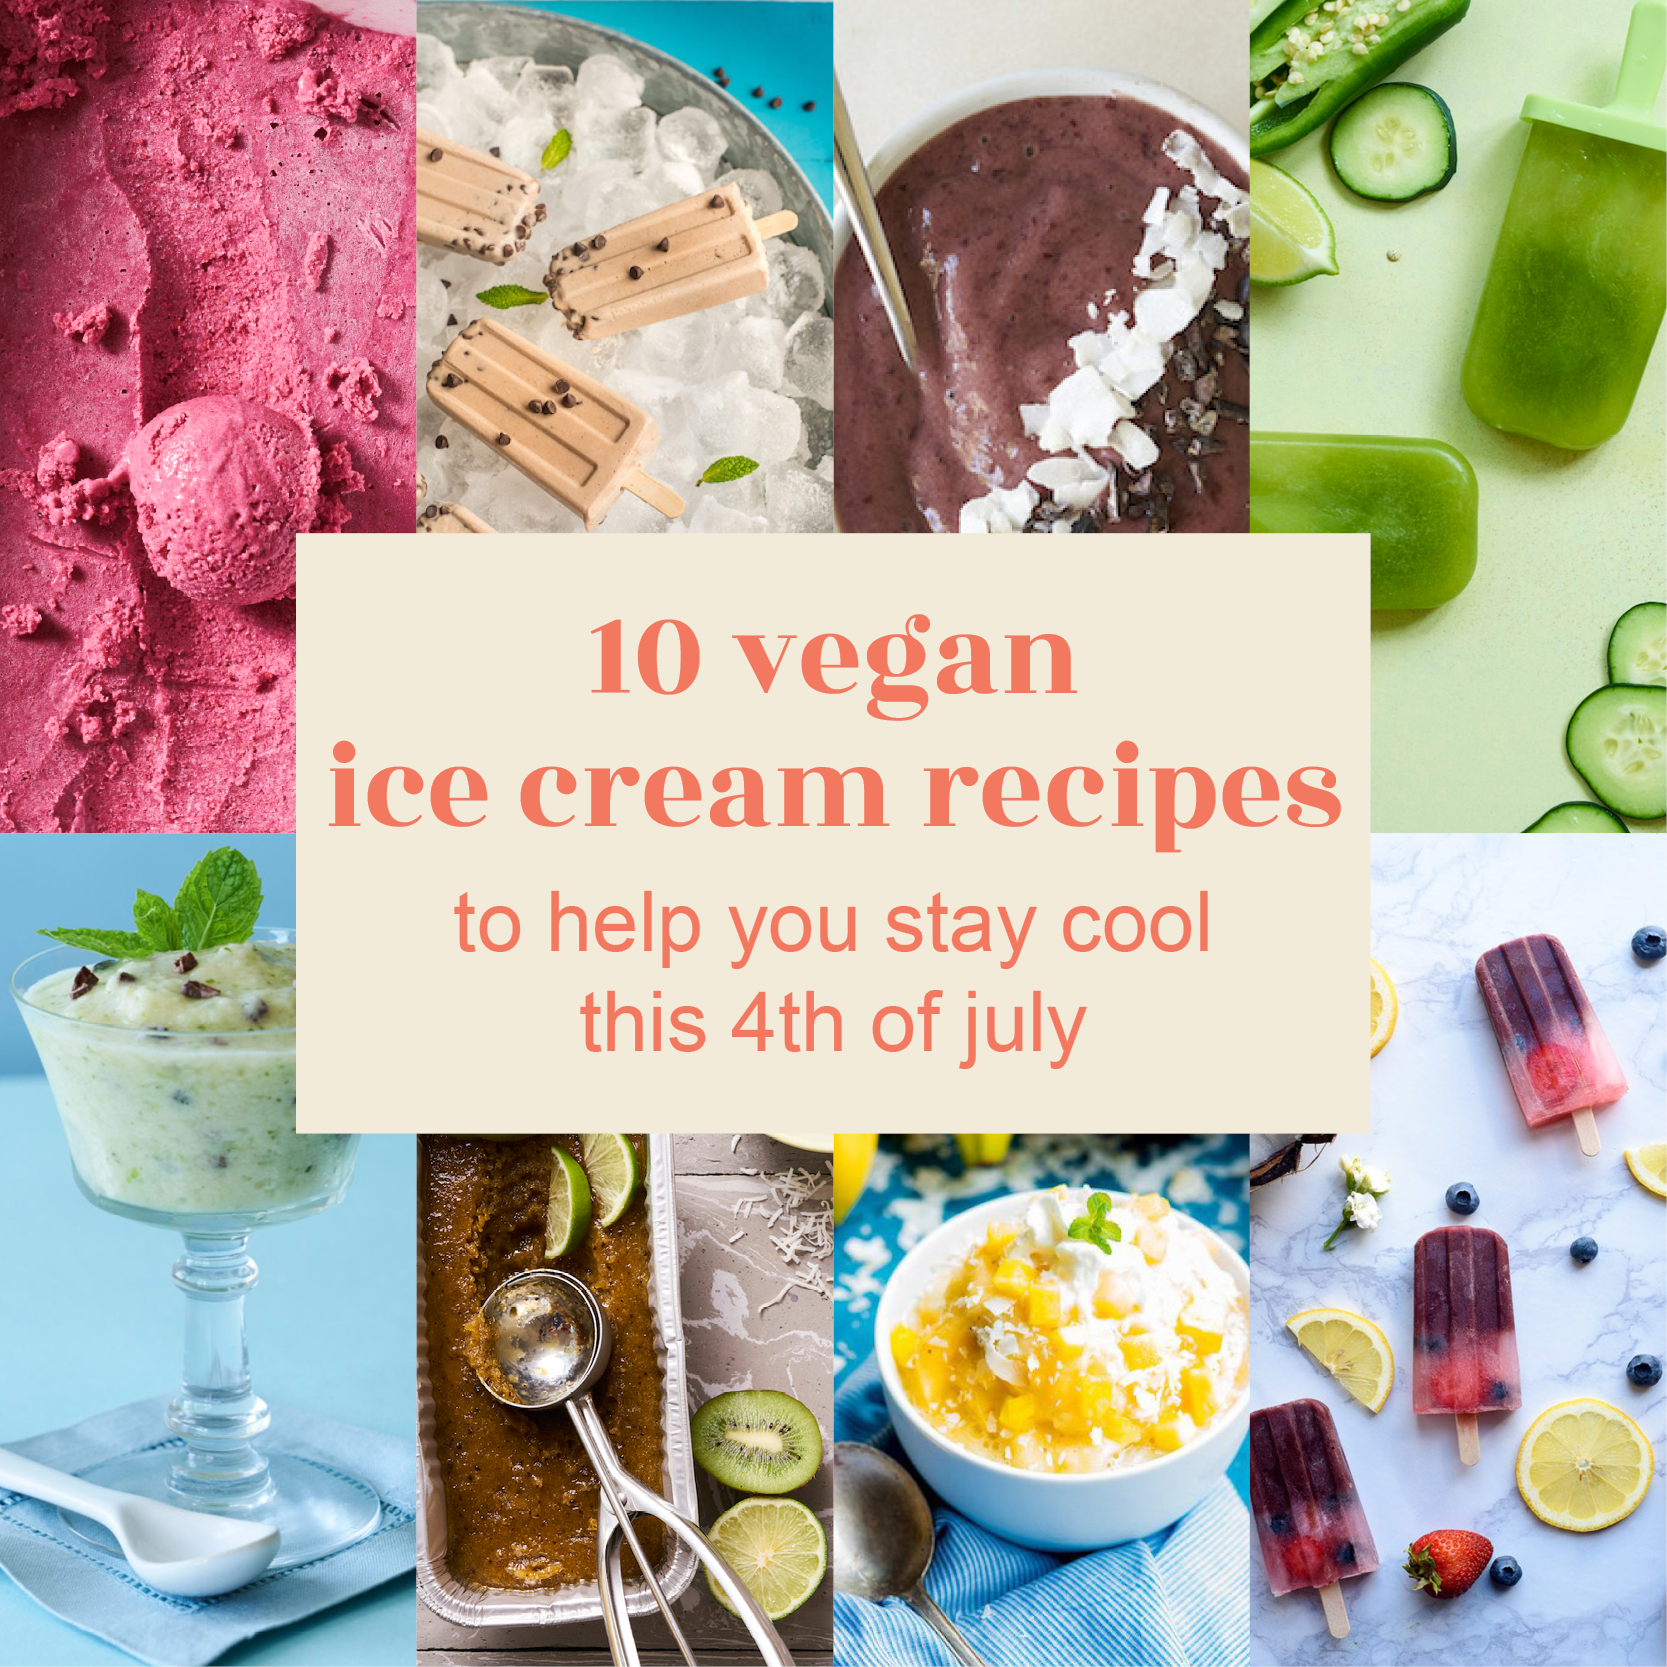 10 Vegan Ice Cream Recipes to Help You Stay Cool This 4th of July